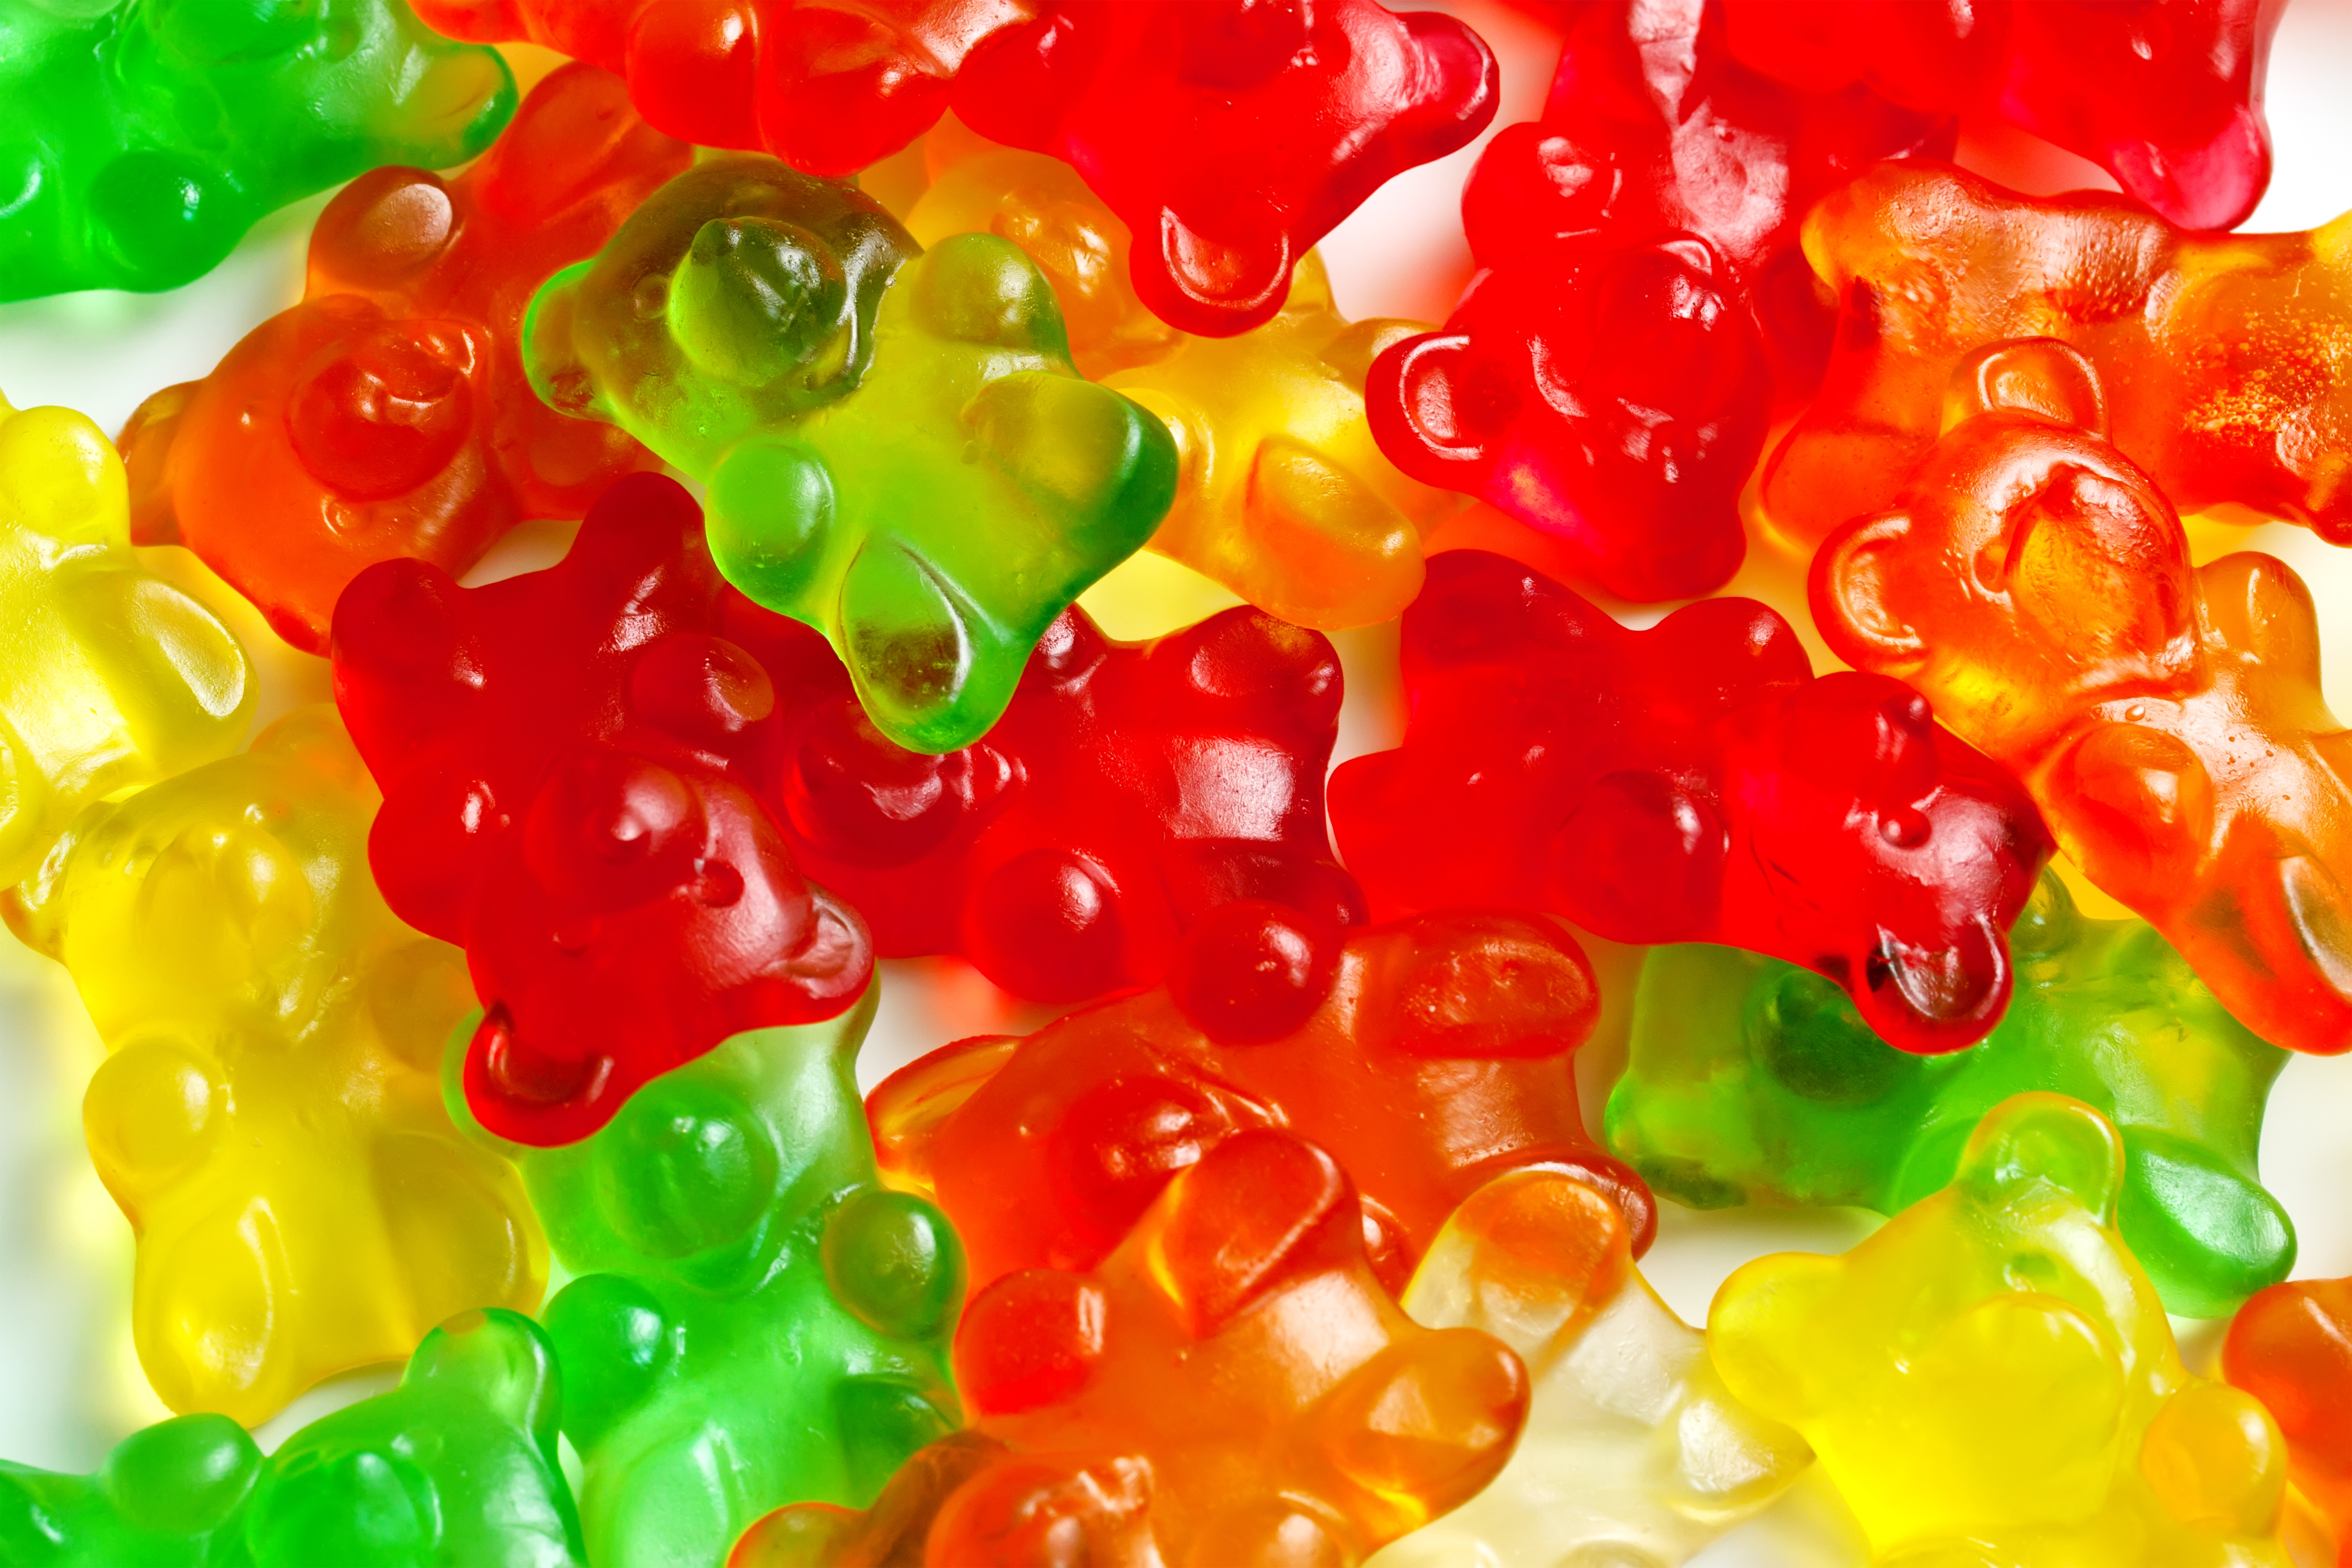 Are gummy bears OK to eat?